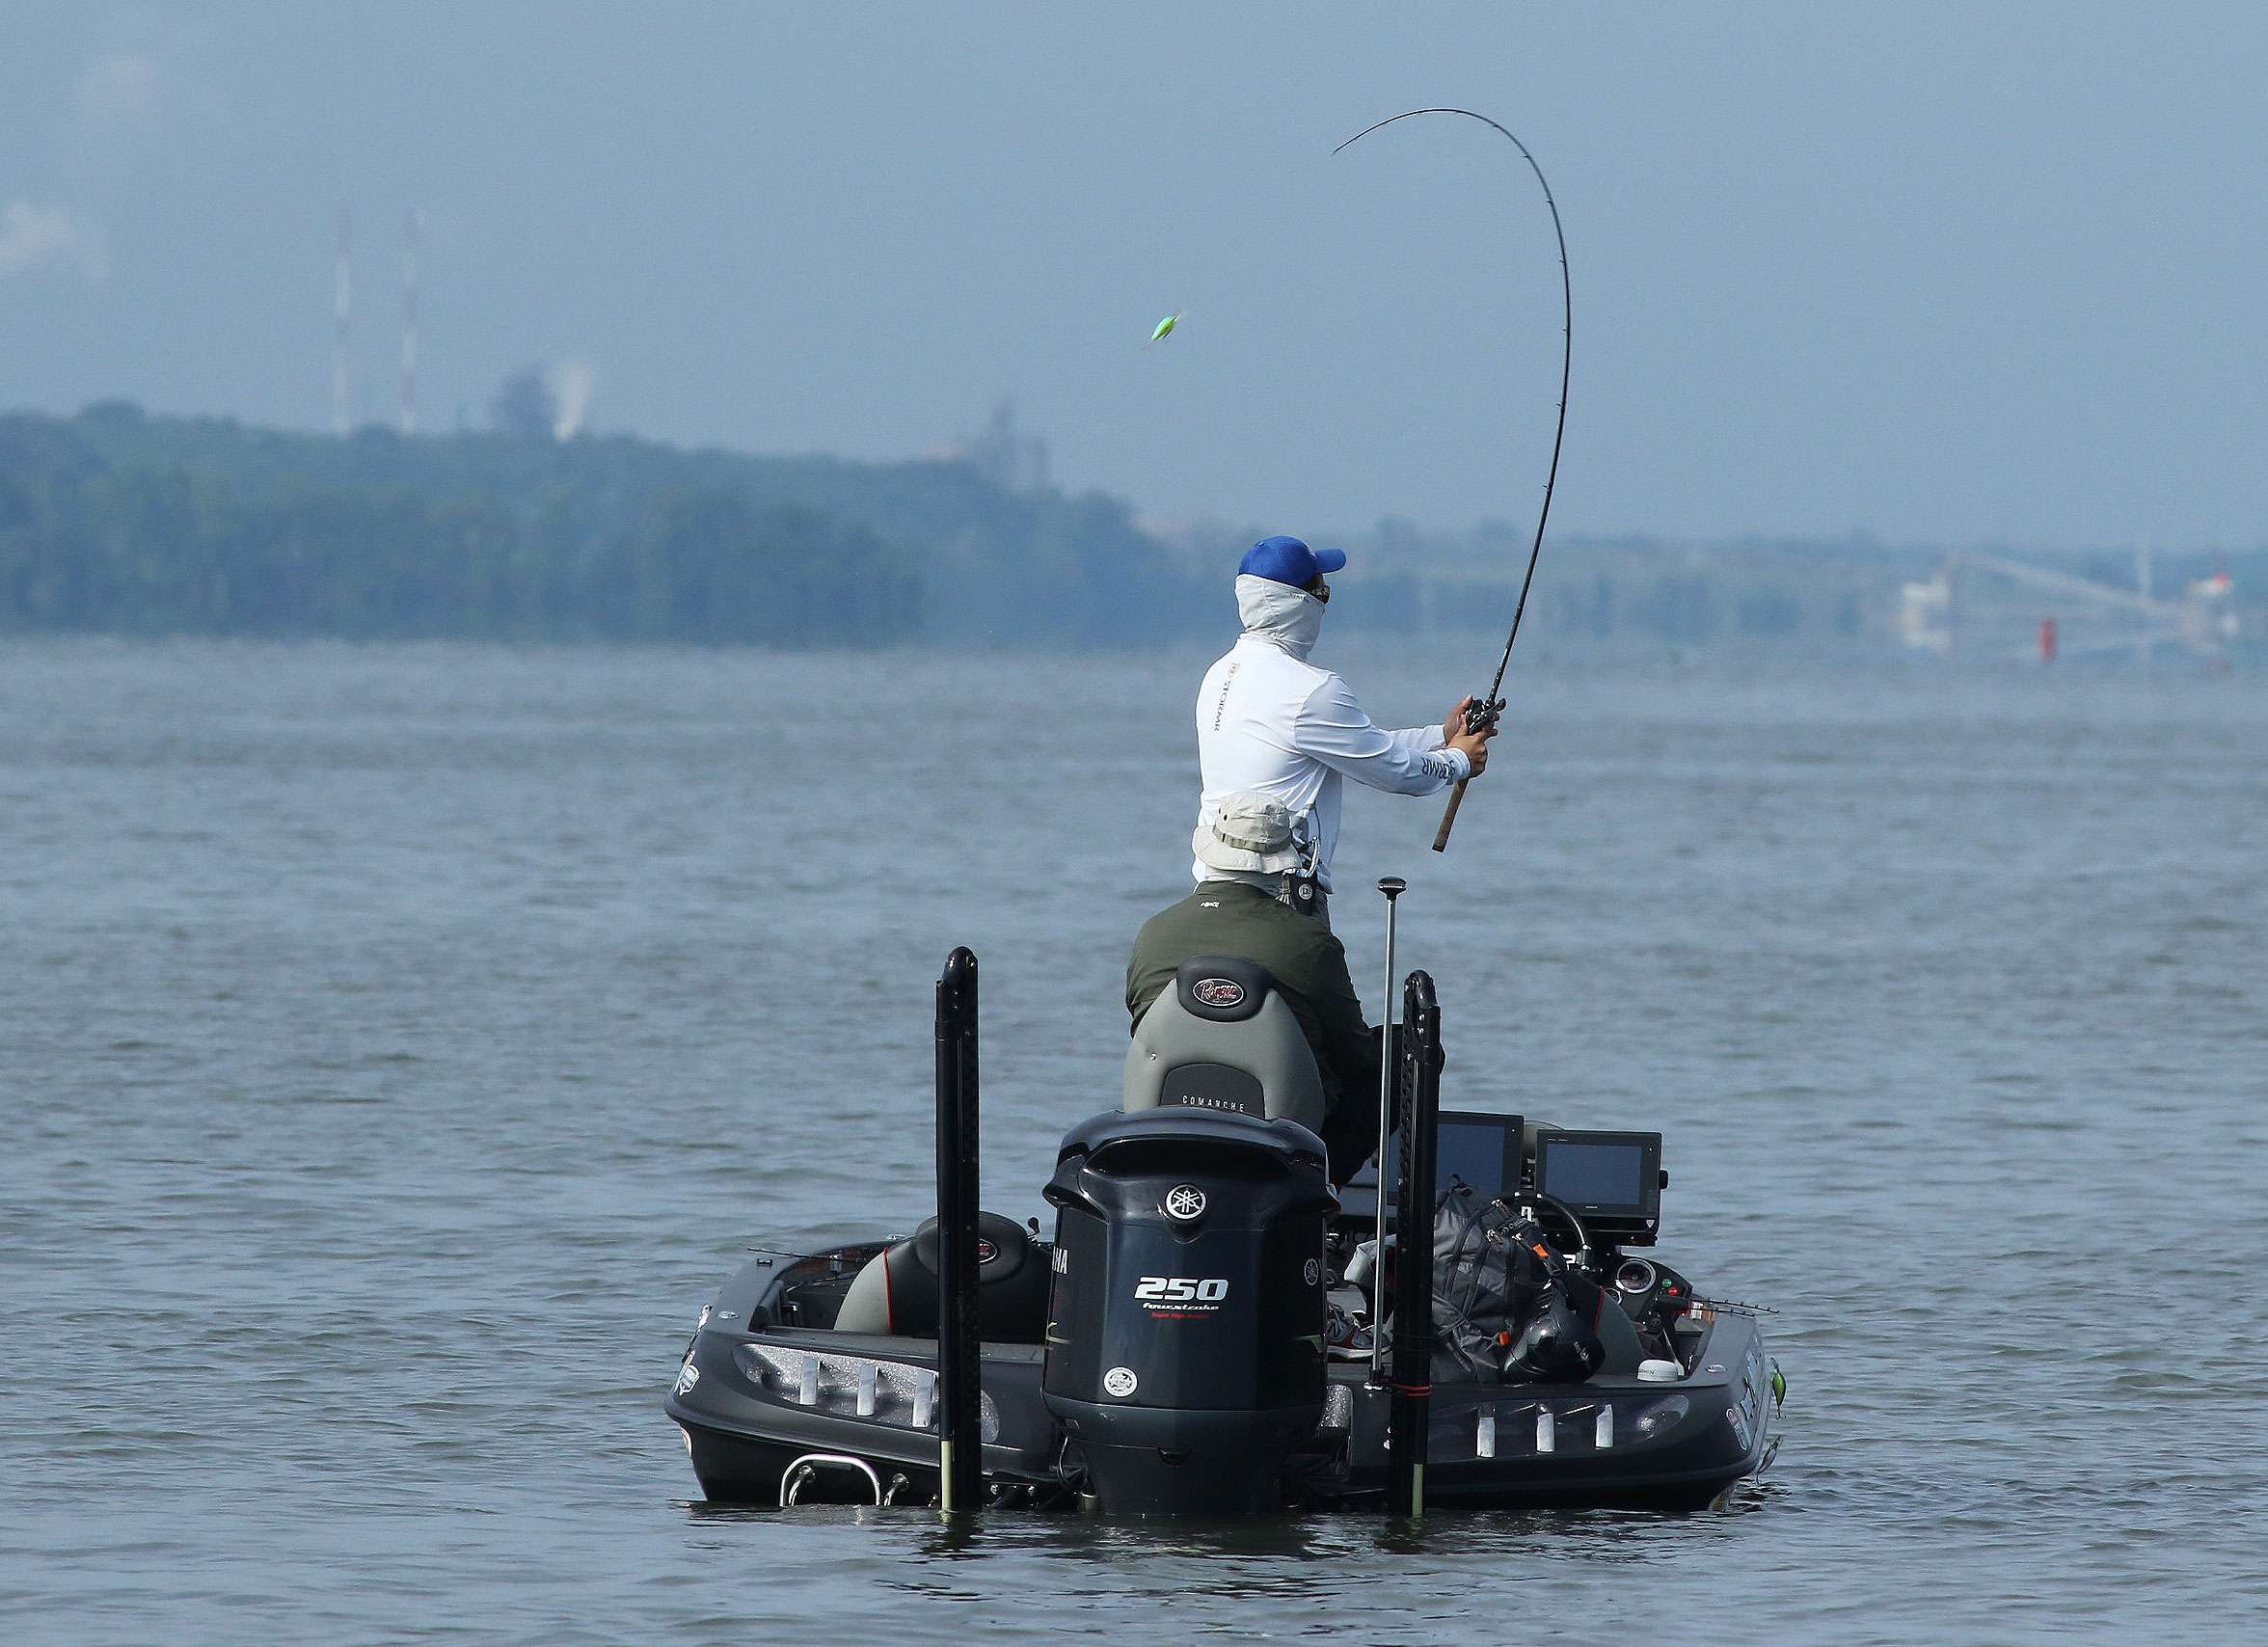 The rookie angler from Connecticut has fared well on the Tennessee River in the past. But was struggling early.